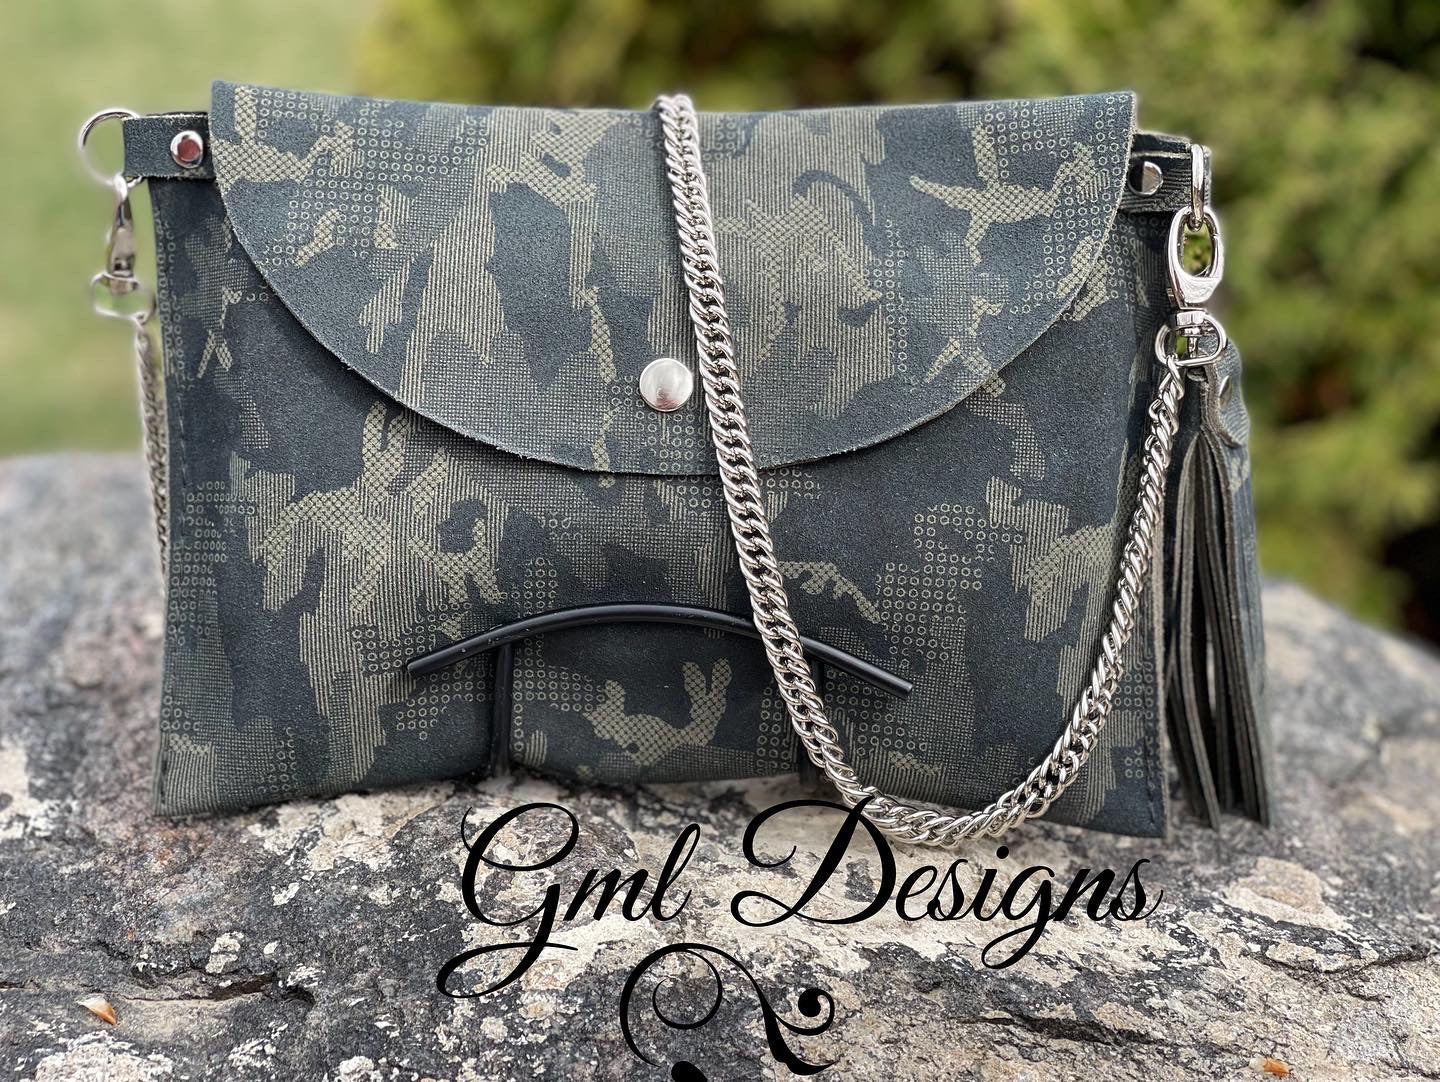 Camouflage Leather Clutch